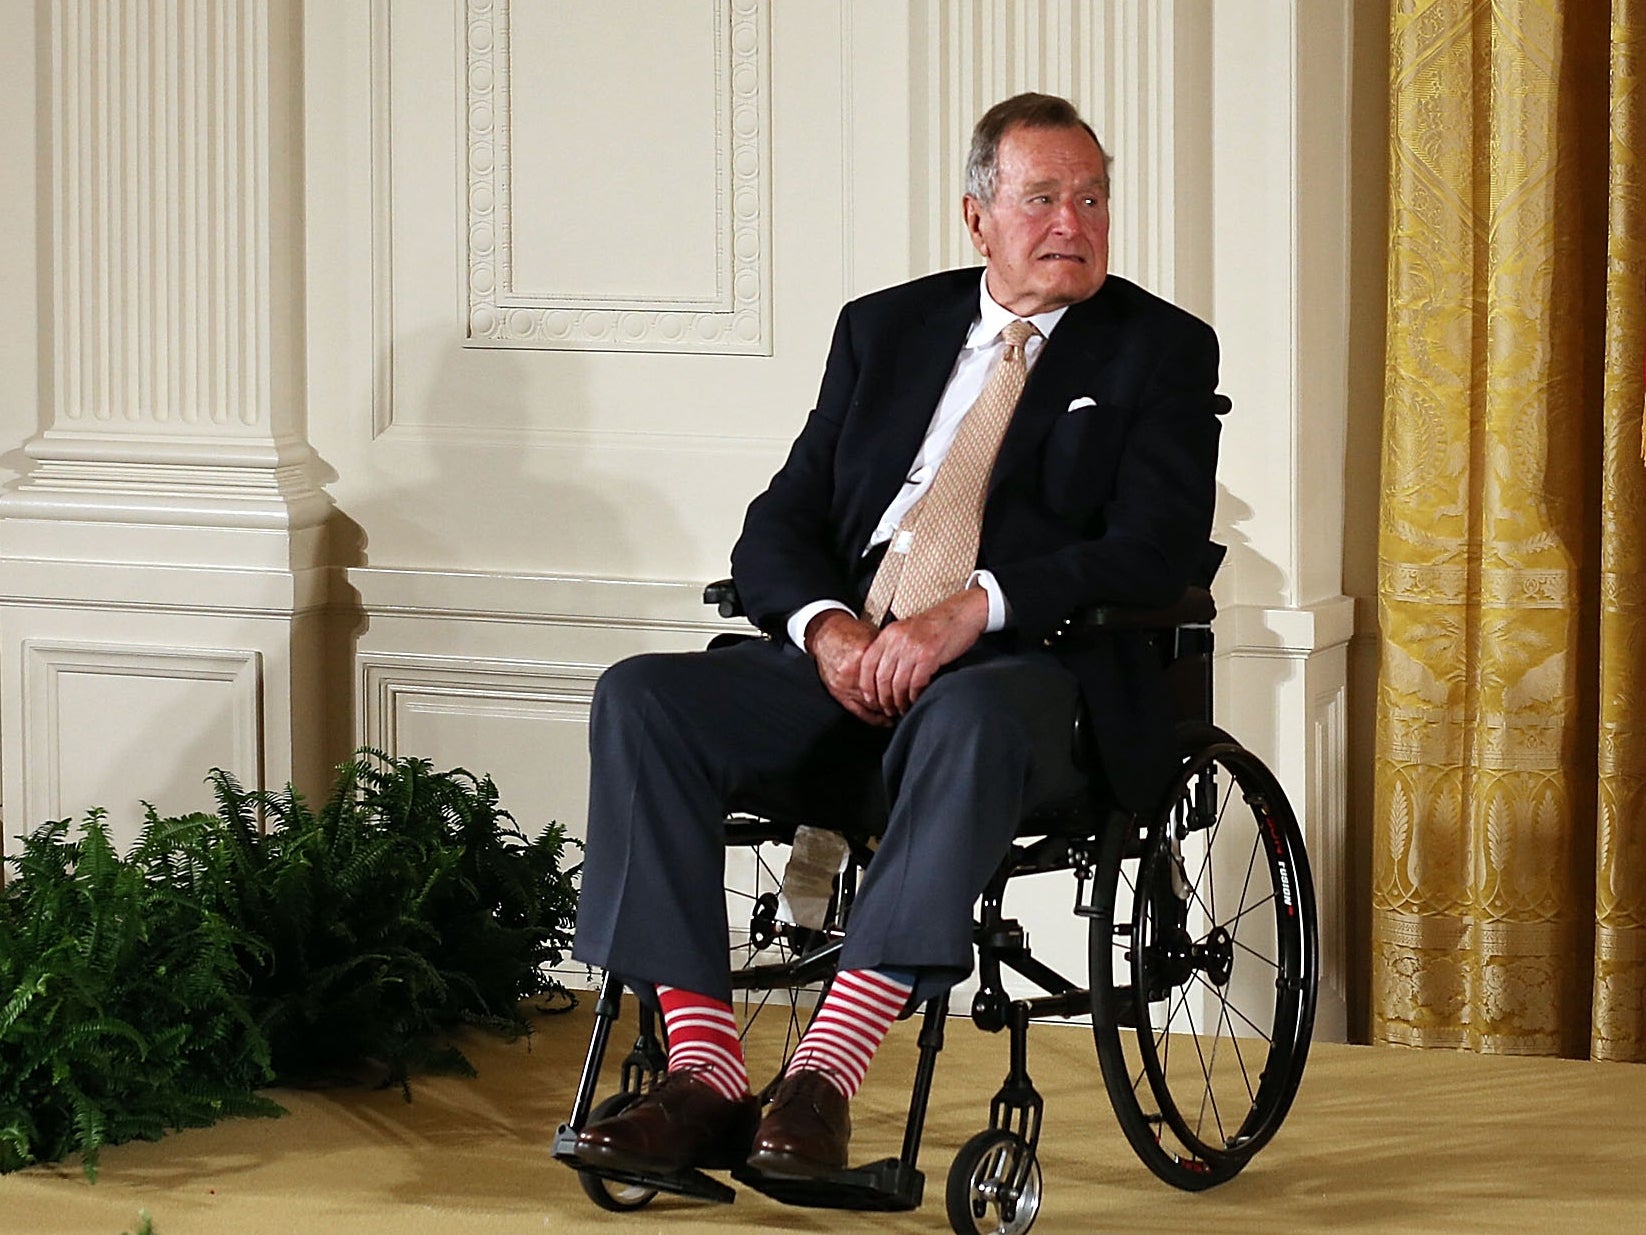 George HW Bush at an event at the White House in 2013